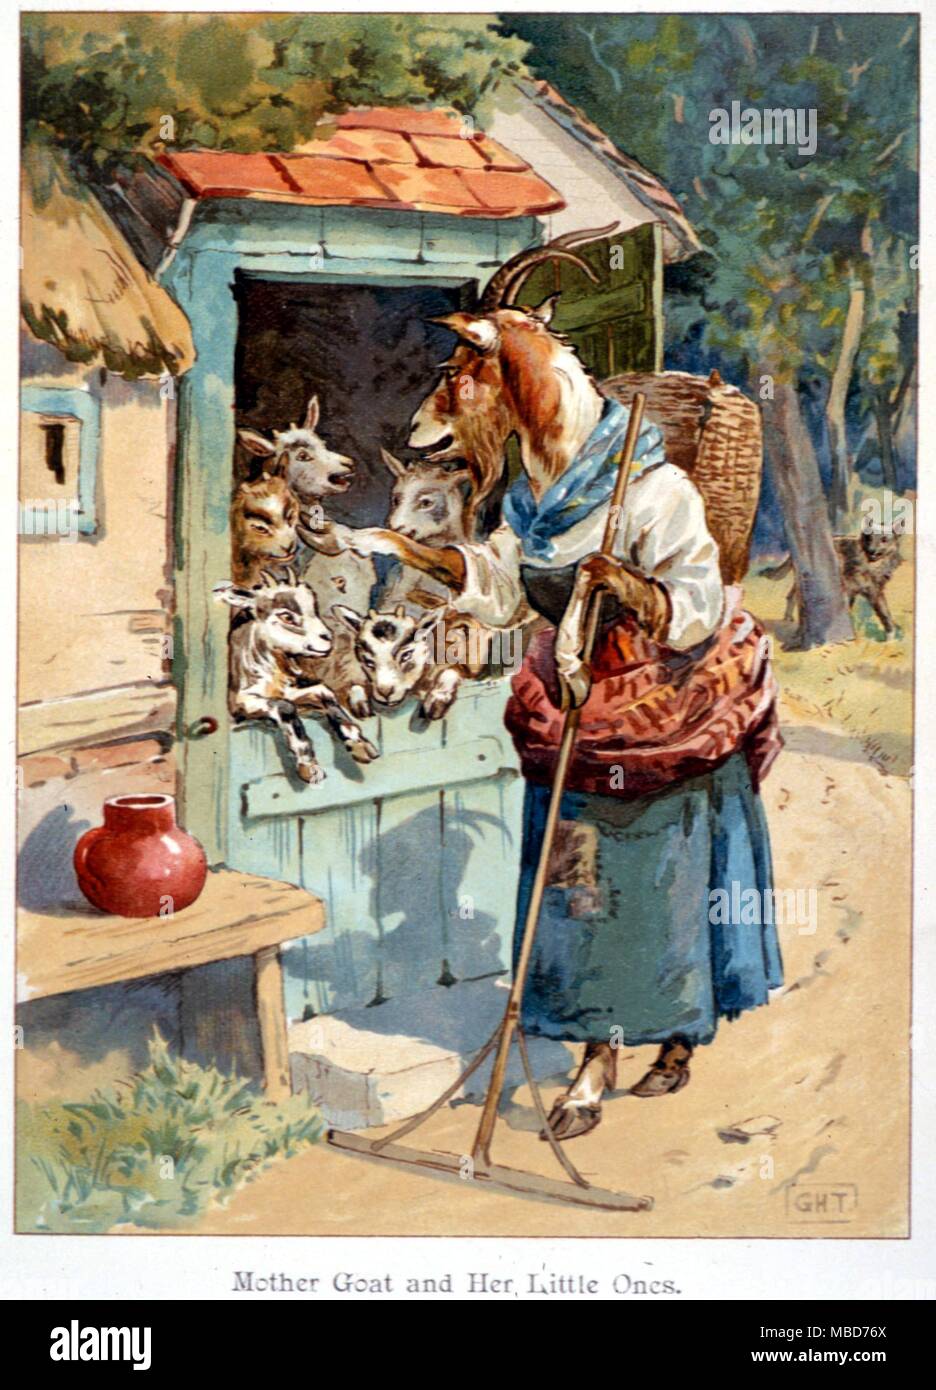 Fairies - Mother Goat and Her Little Ones. Lithographic illustration from Marriott Watson (et al) - Once Upon a Time 1890 Stock Photo